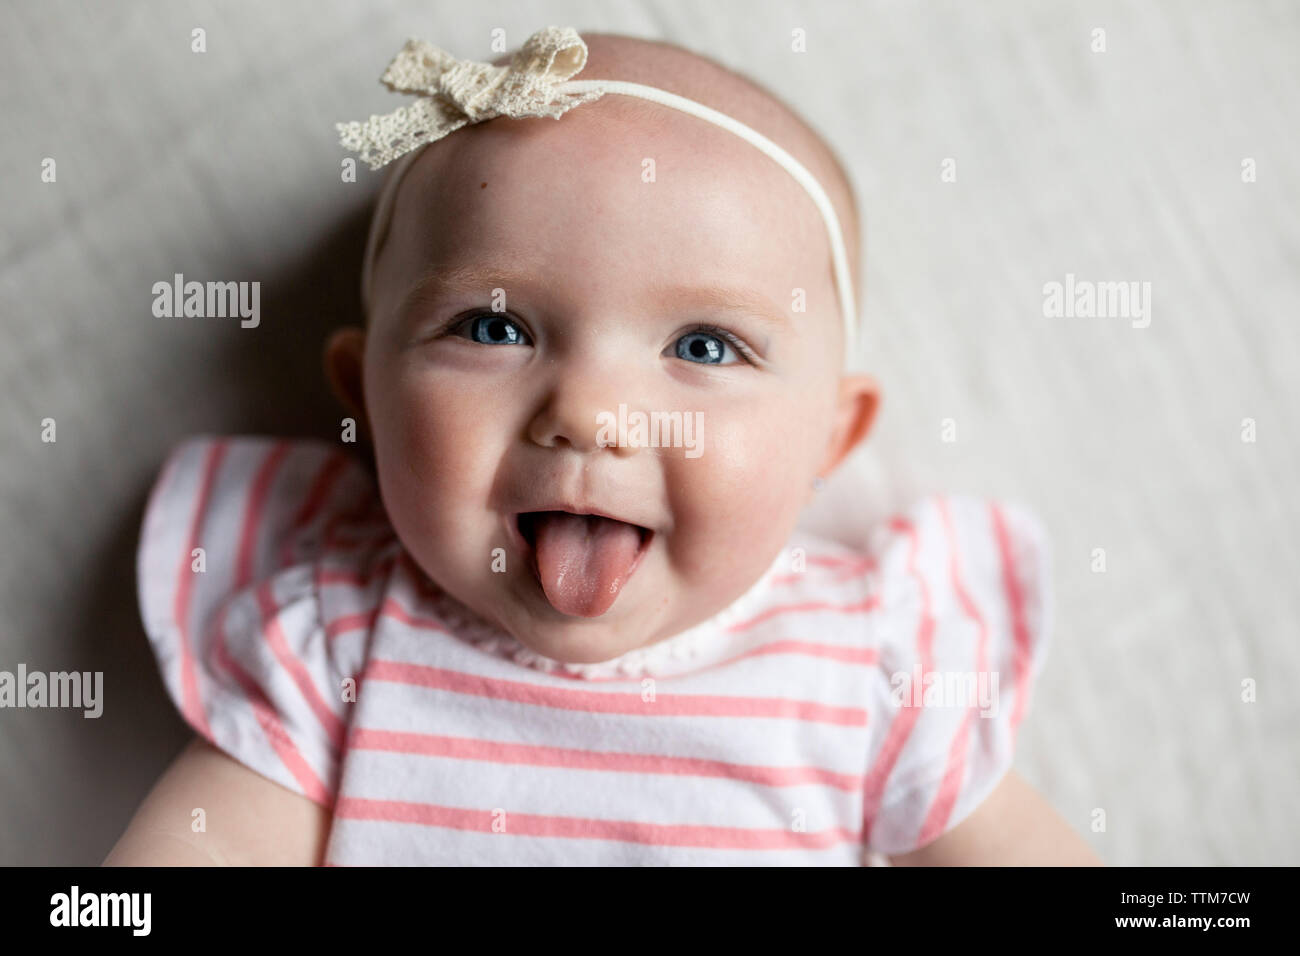 Close-up portrait of happy baby girl sticking out tongue while relaxing on bed at home Stock Photo